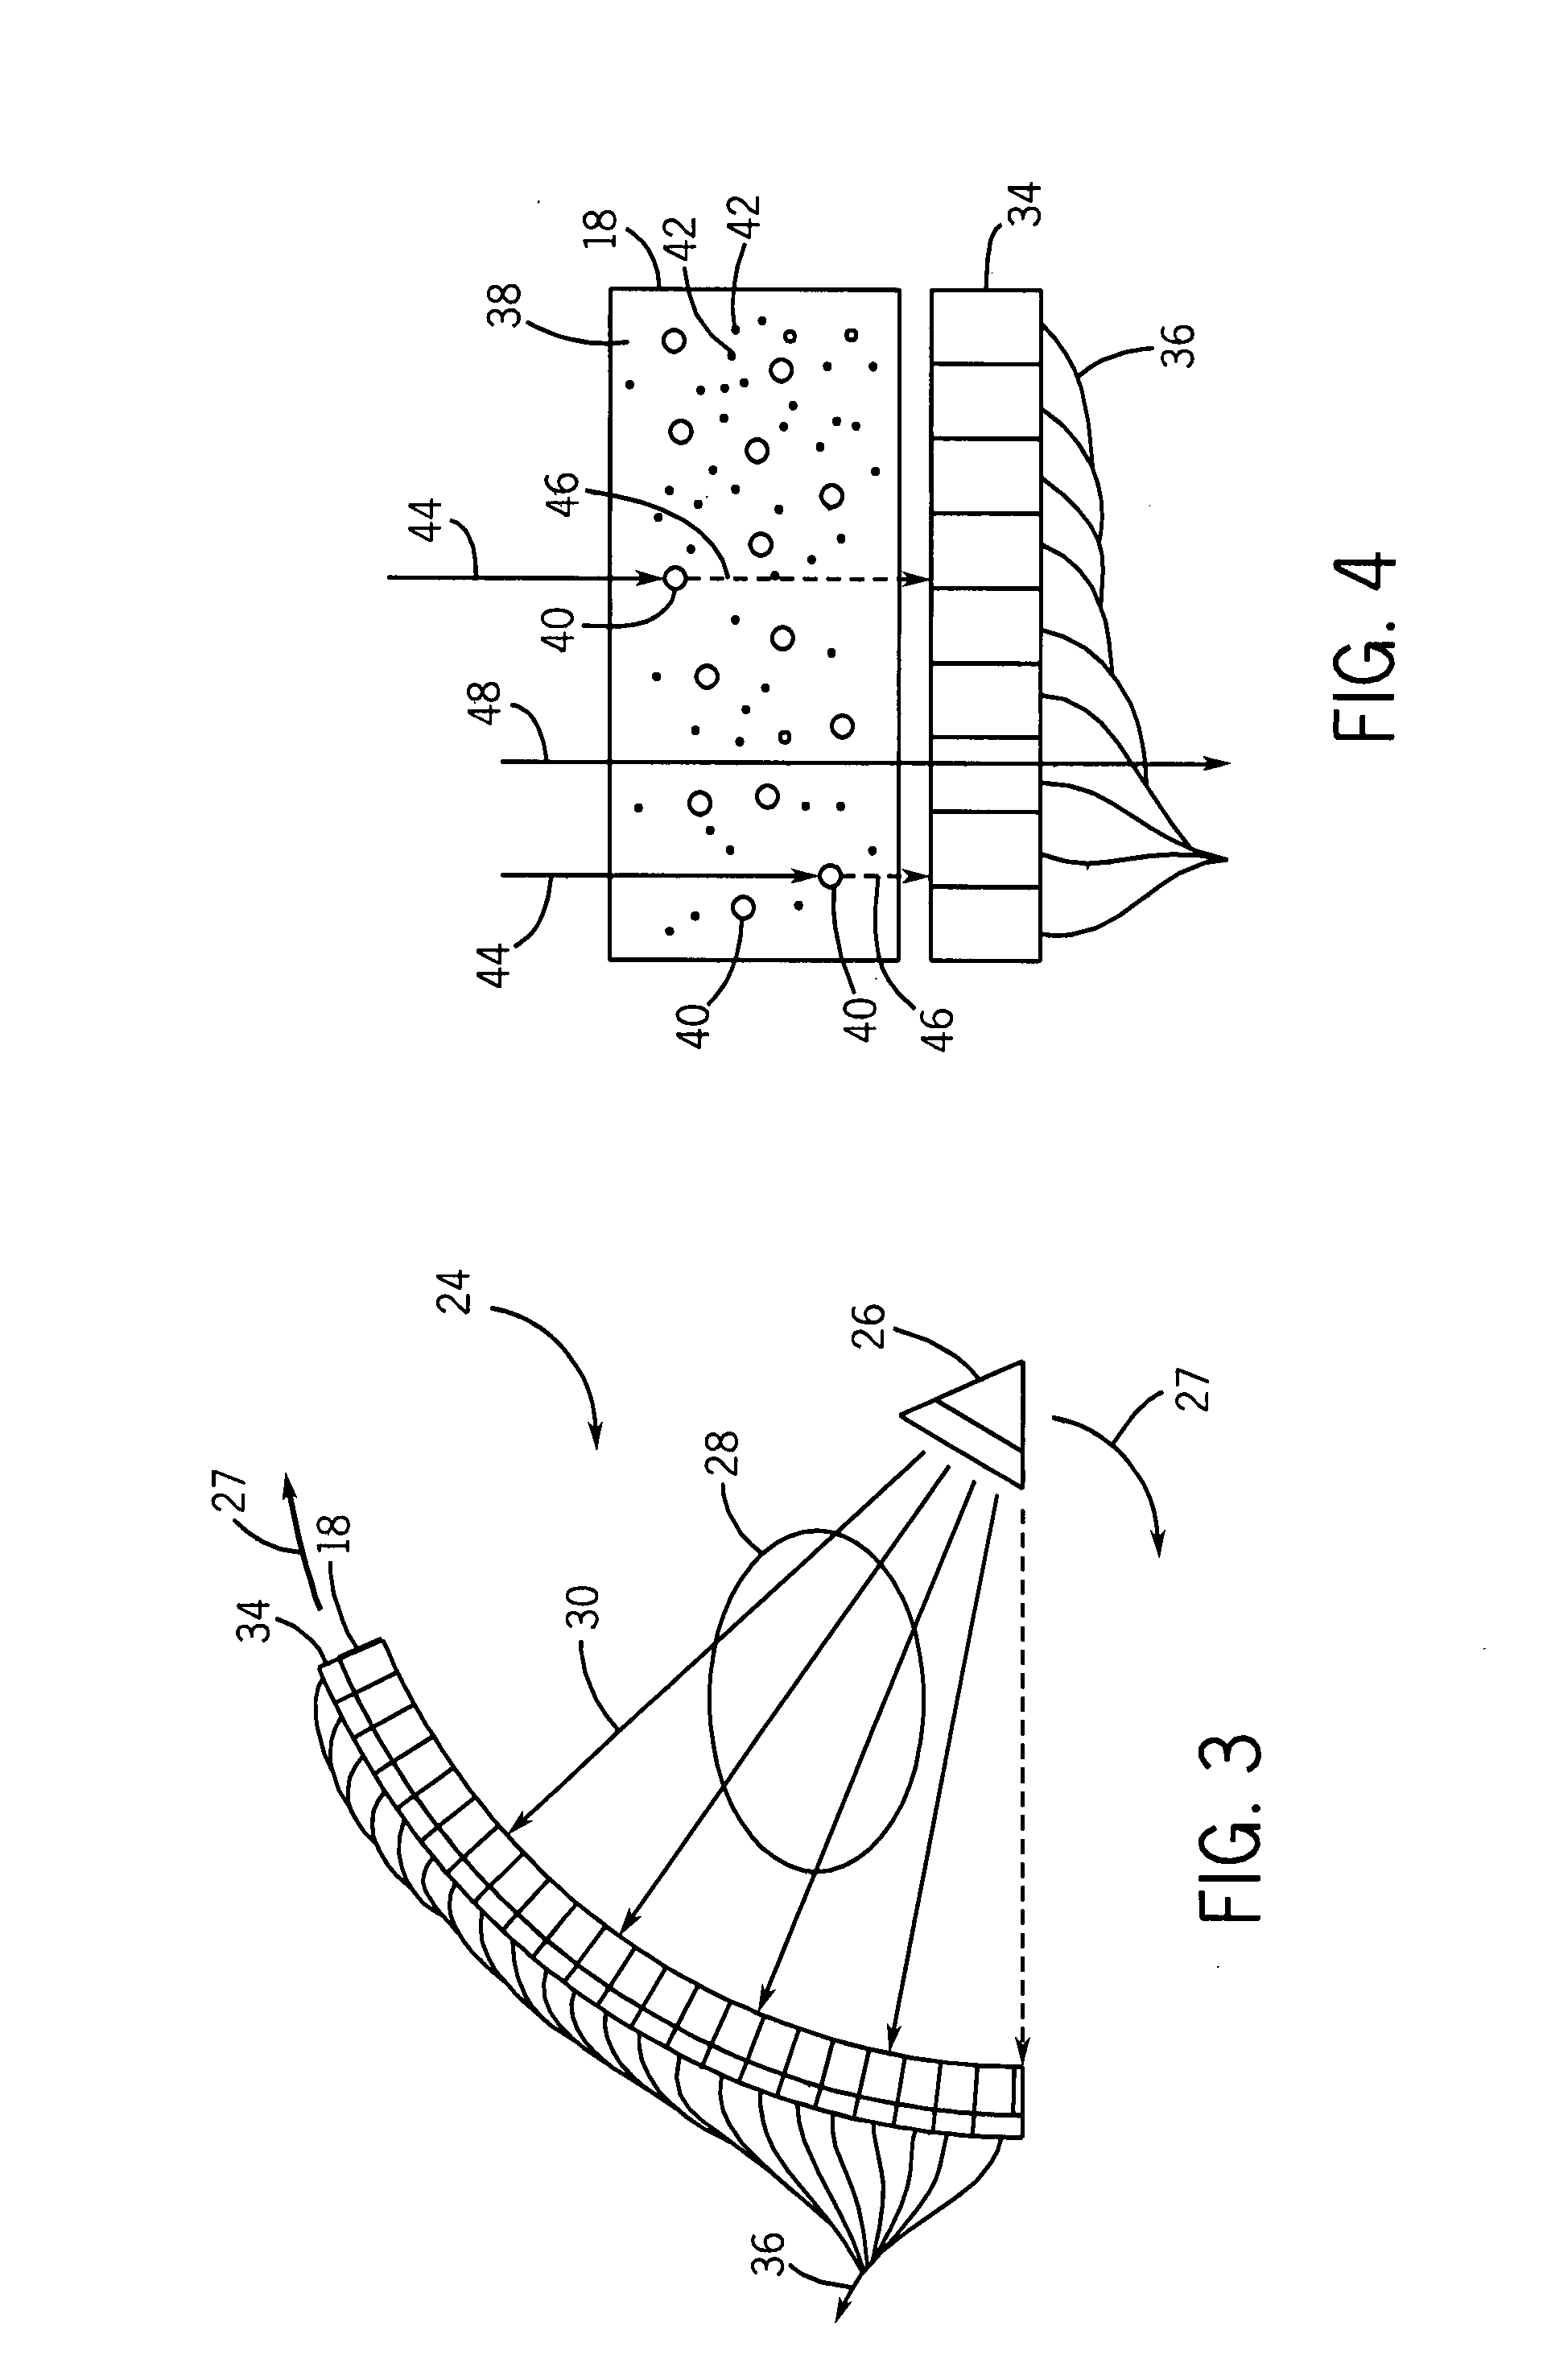 Nano-scale metal oxyhalide and oxysulfide scintillation materials and methods for making same